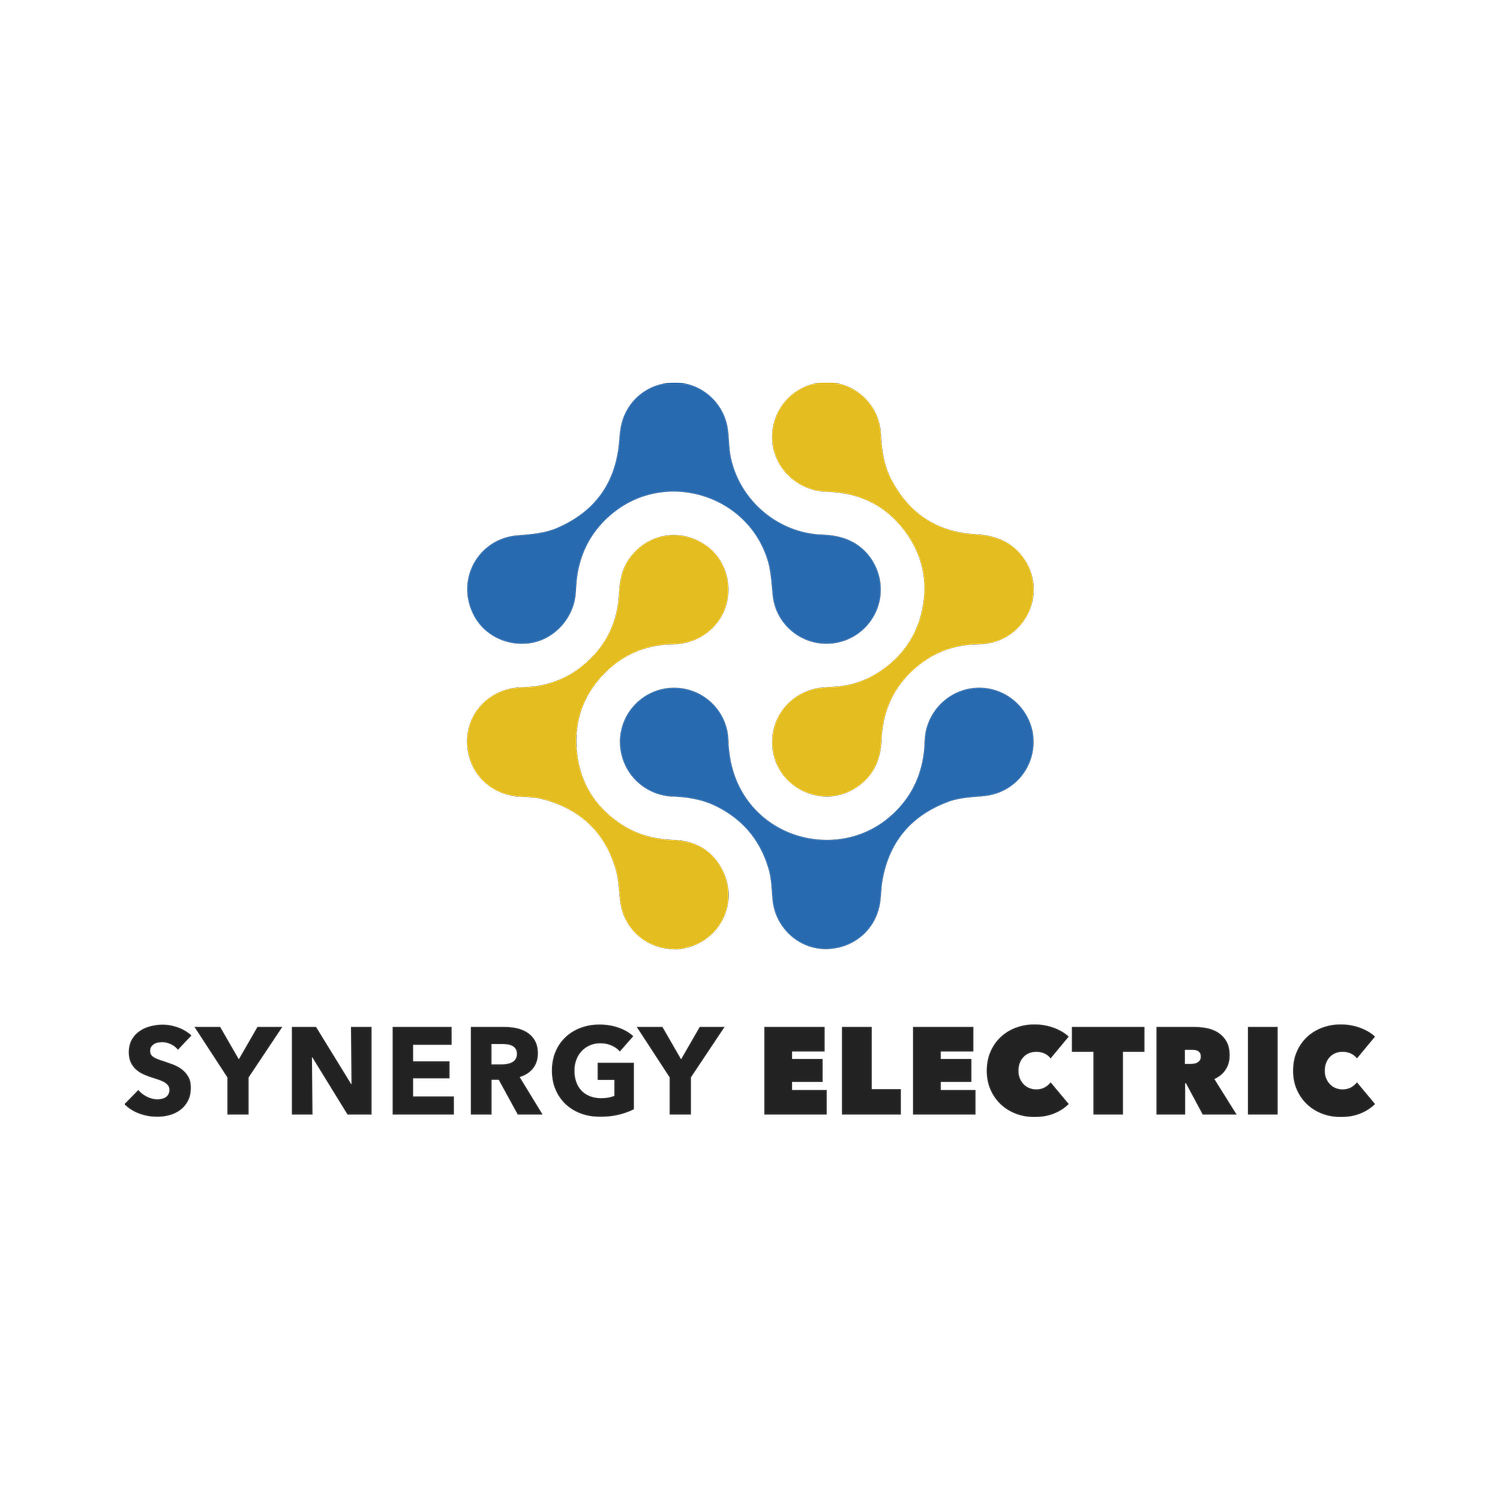 Synergy Electric of British Columbia